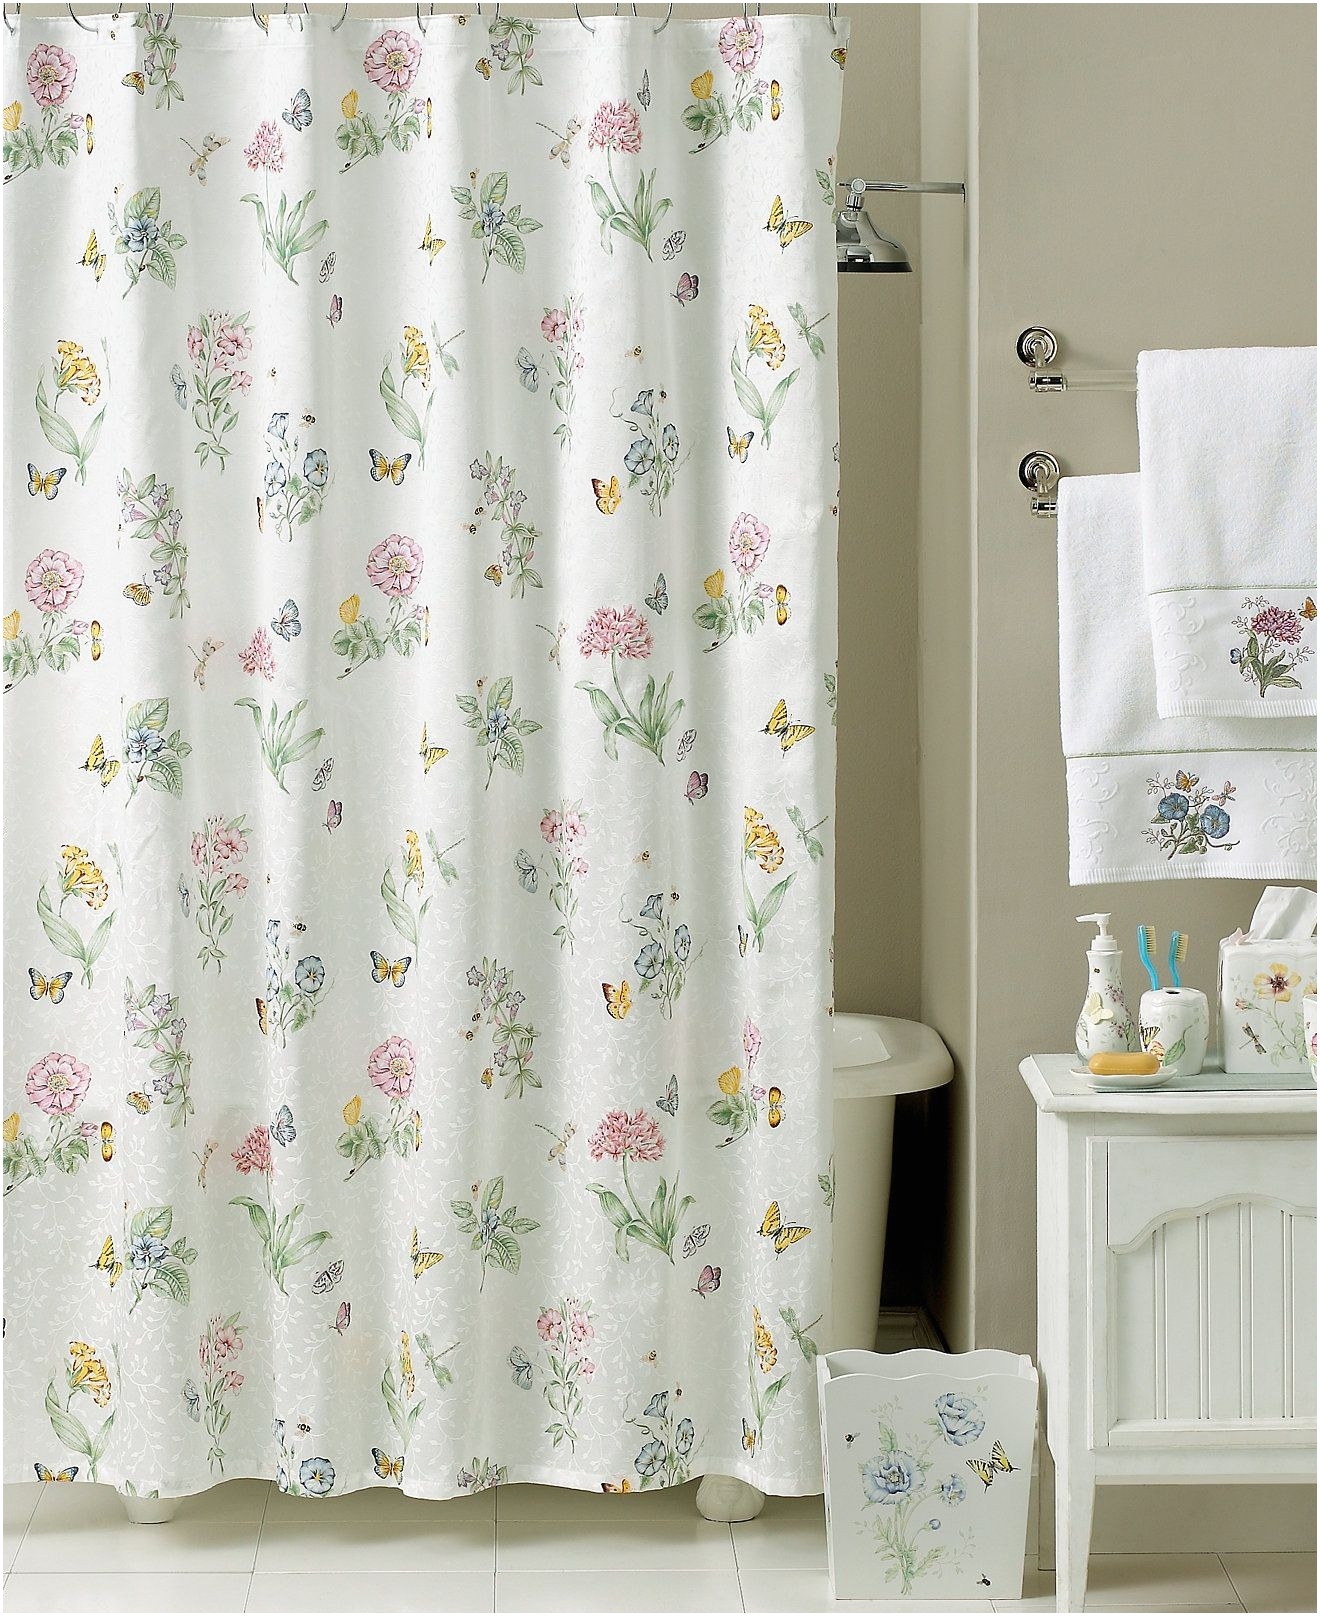 full size of home design shower curtains at kohls awesome butterfly meadow shower curtain bath large size of home design shower curtains at kohls awesome